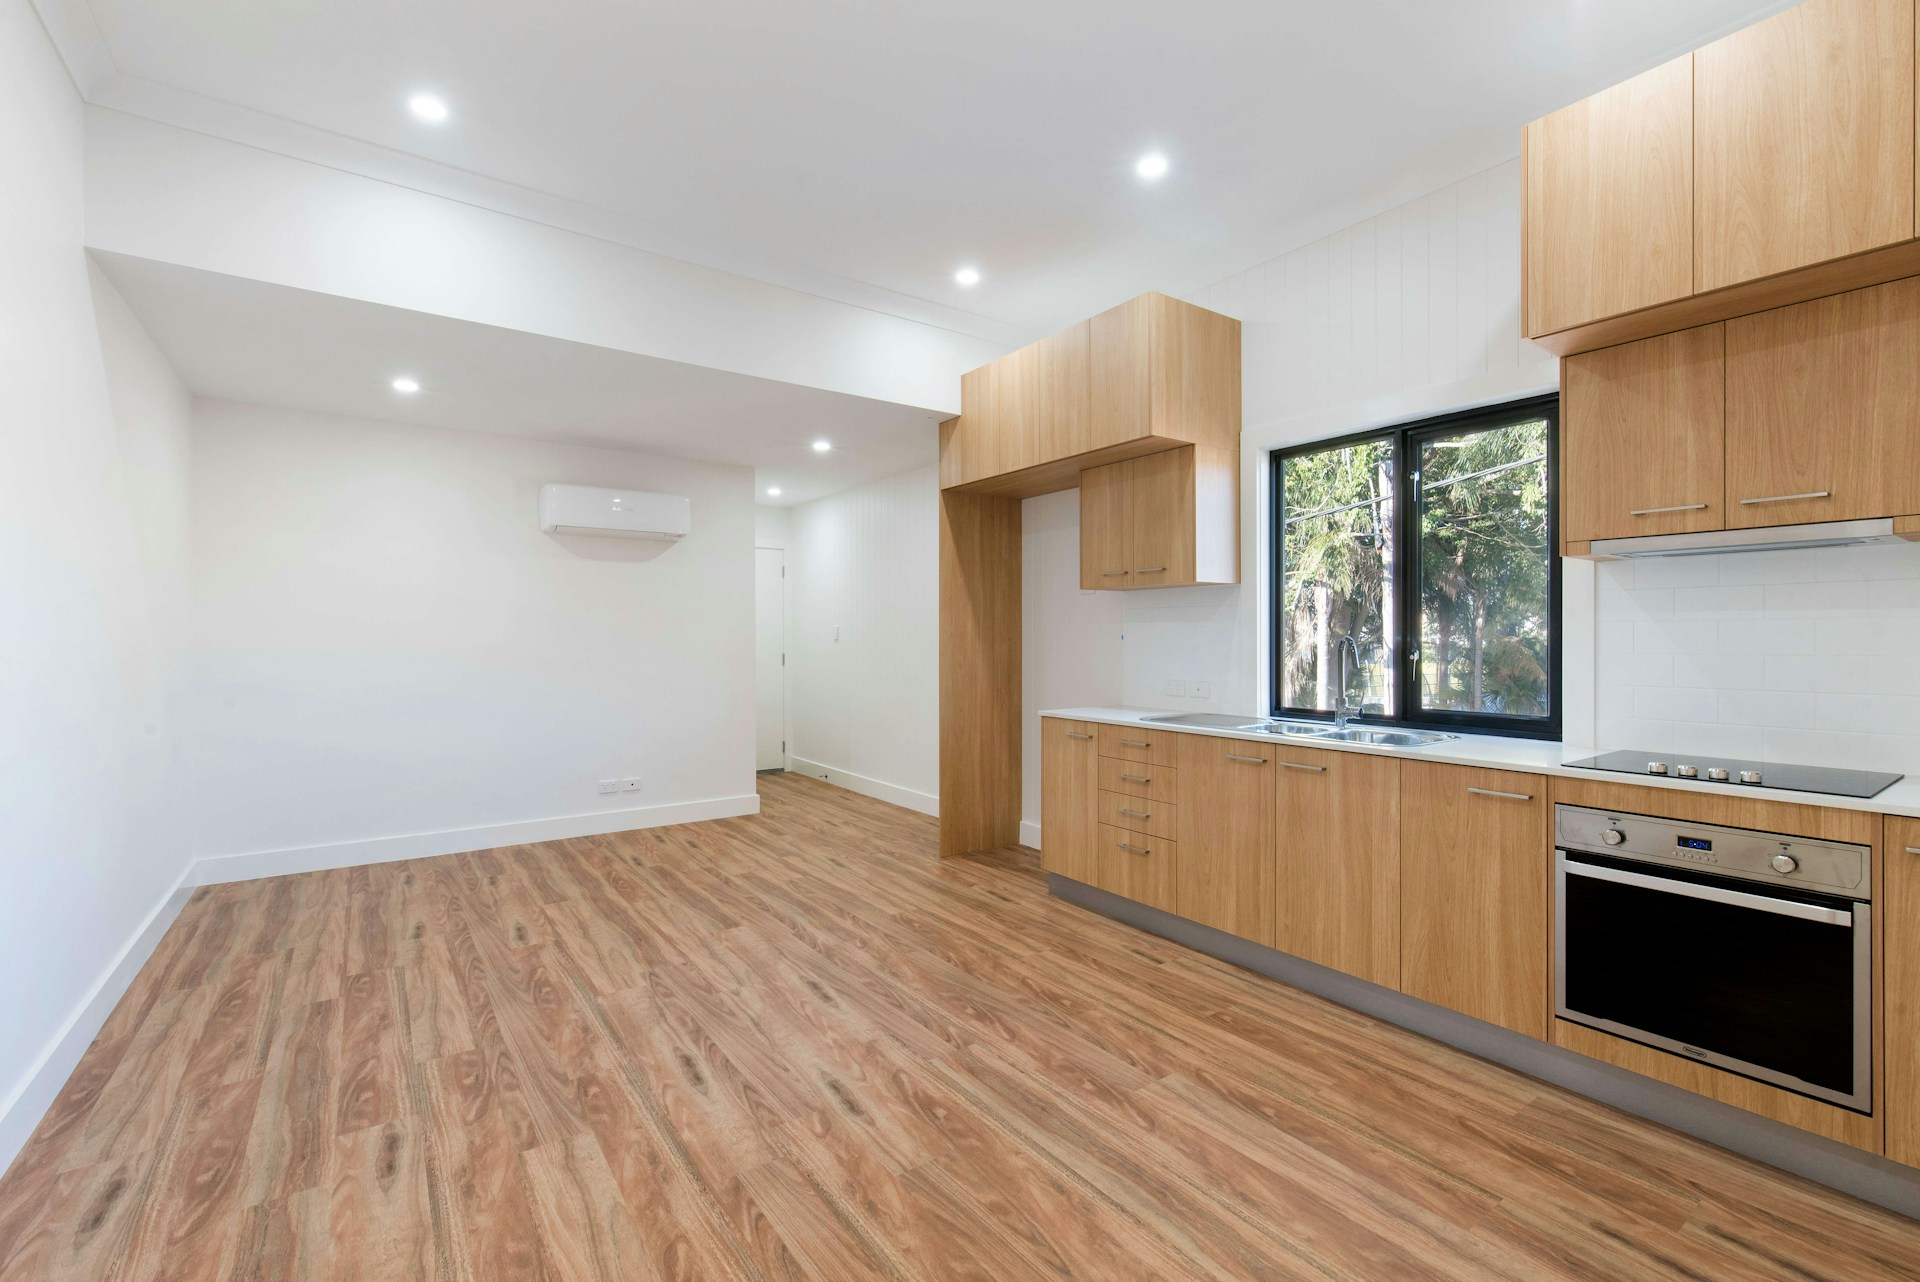 How to Clean Pre-finished Hardwood Floors